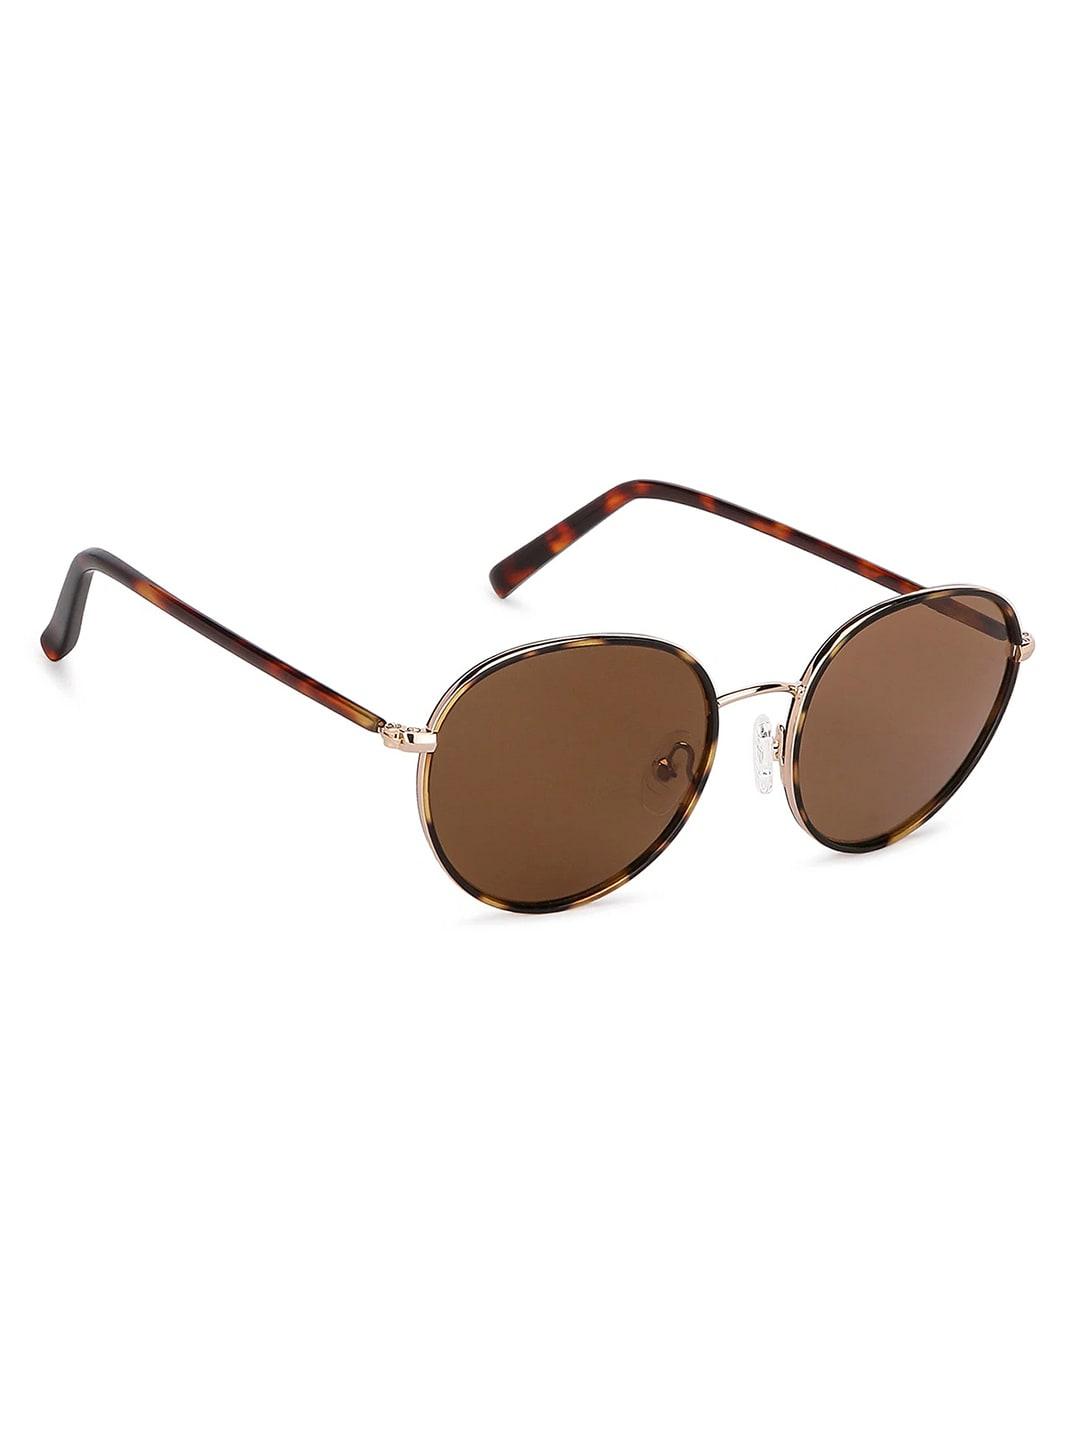 john jacobs unisex brown lens & gold-toned round sunglasses with polarised and uv protected lens